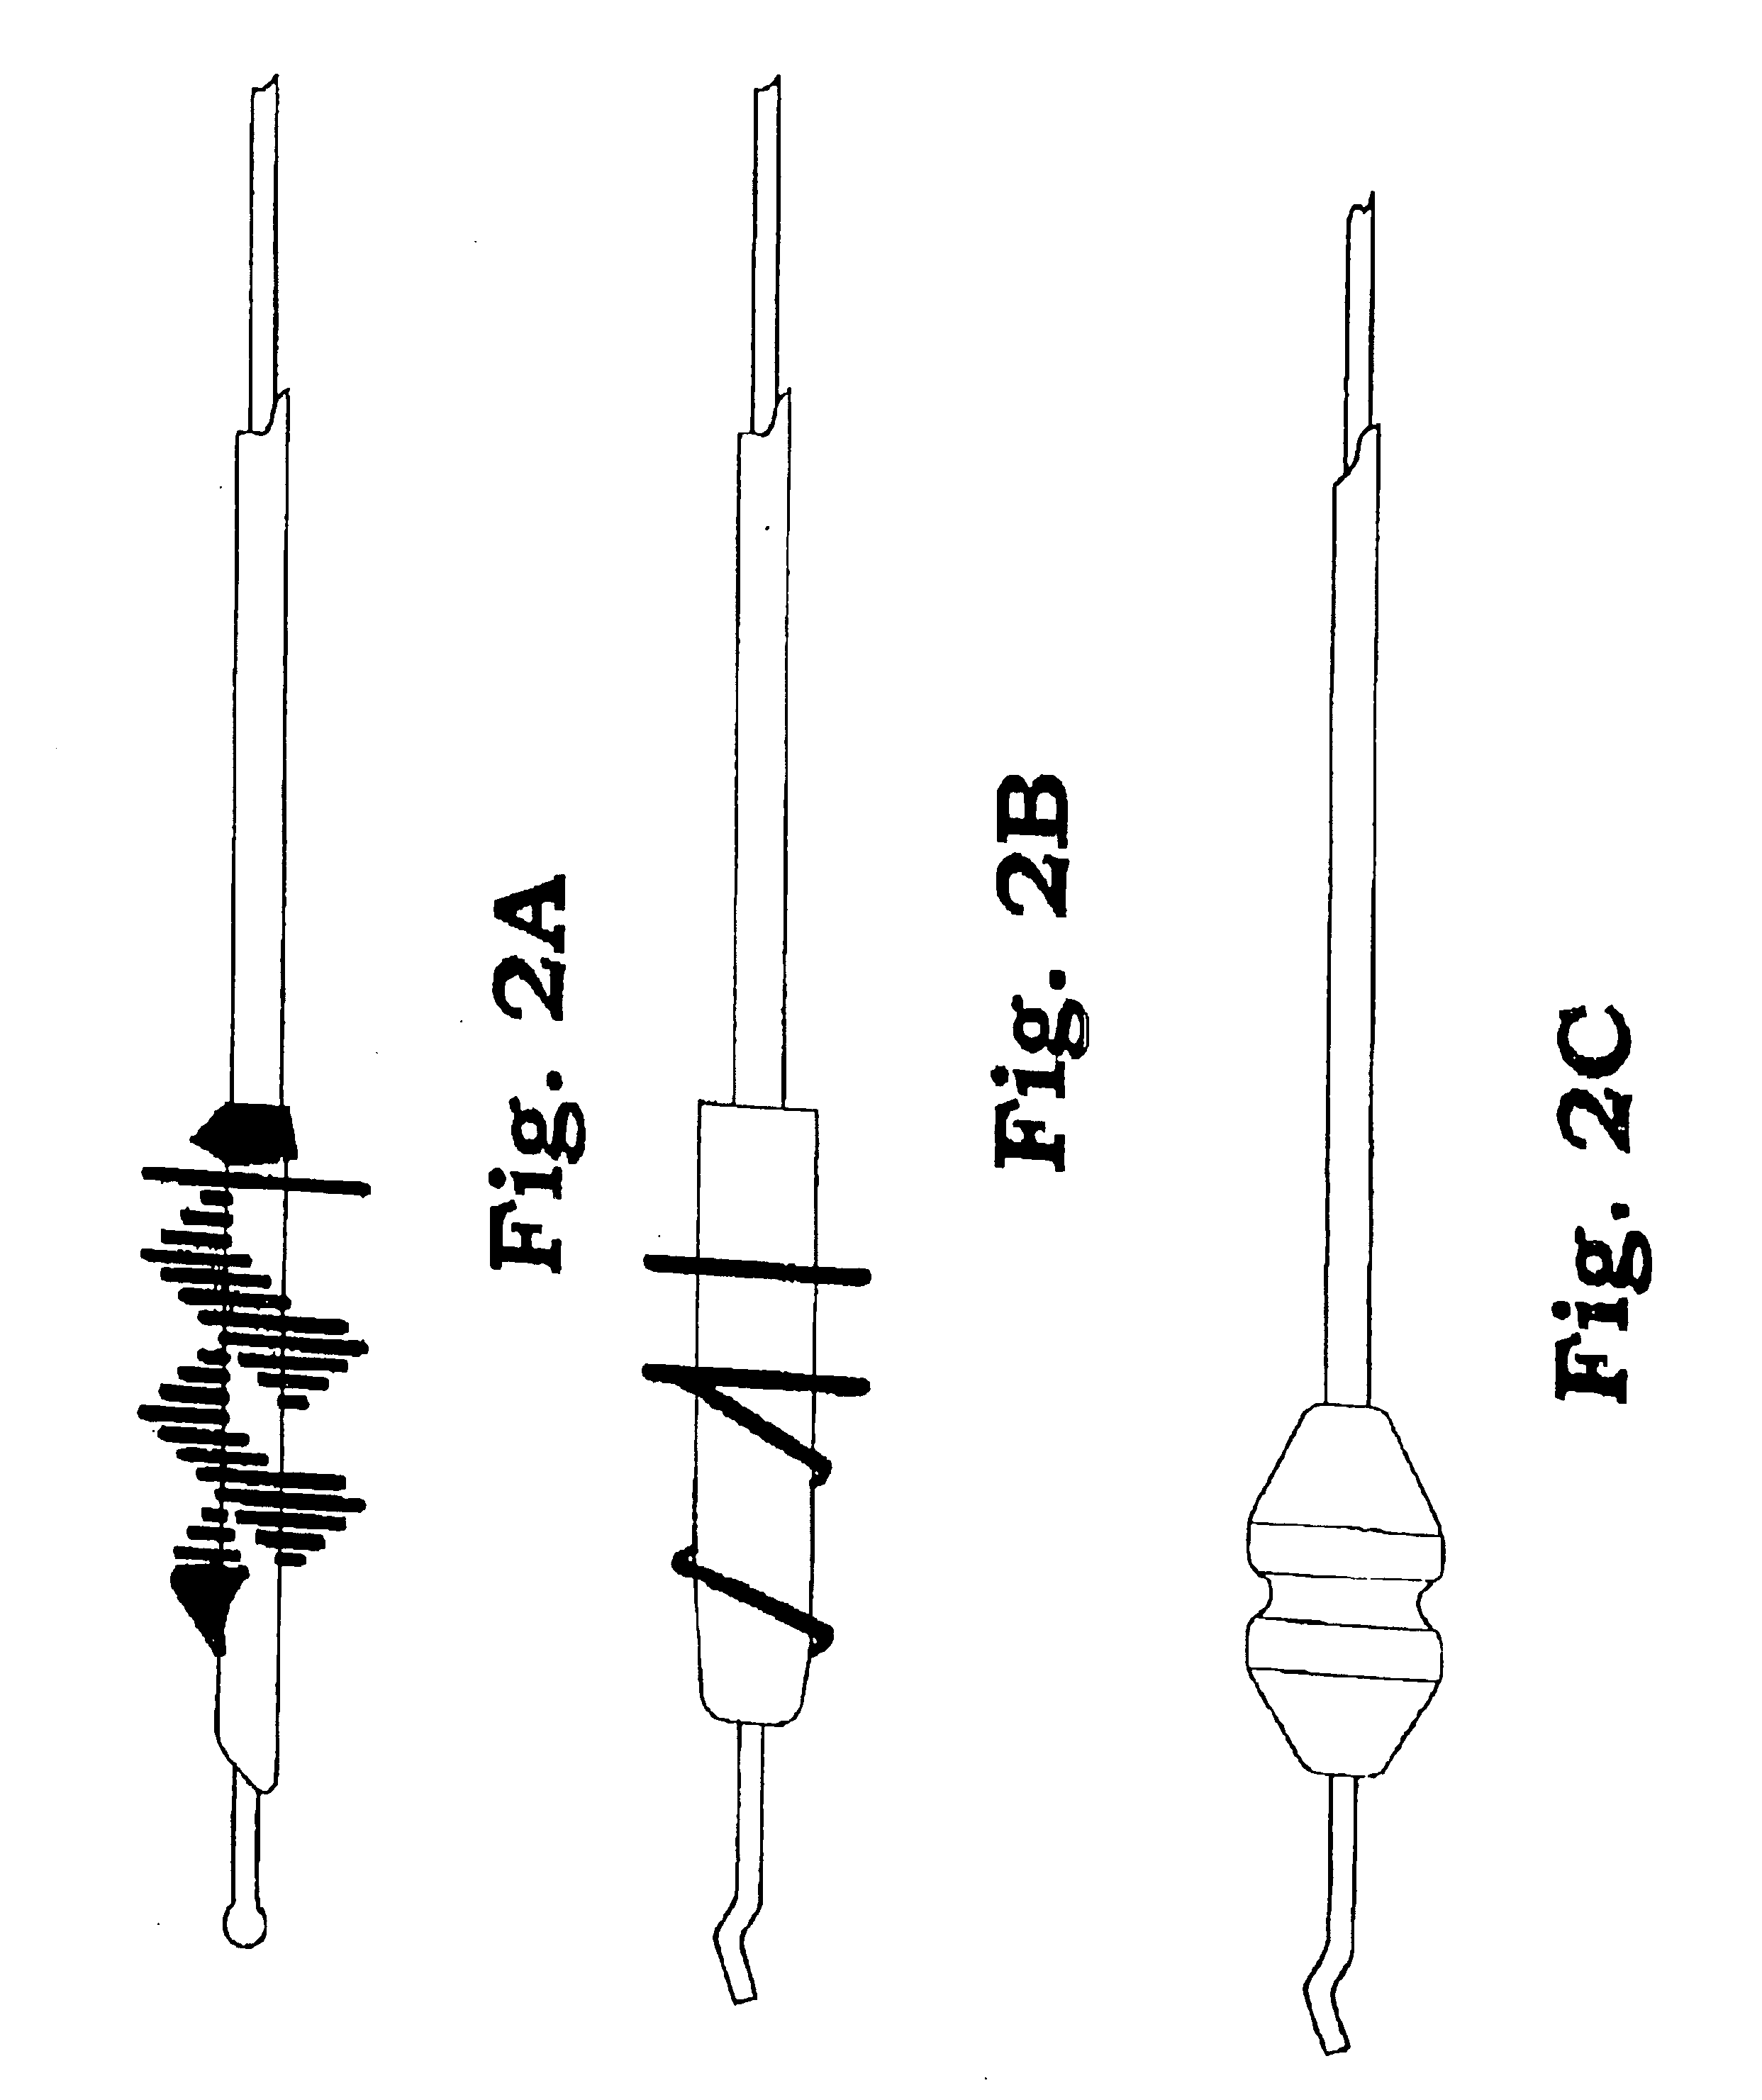 Apparatus for creating a pathway in an animal and methods therefor